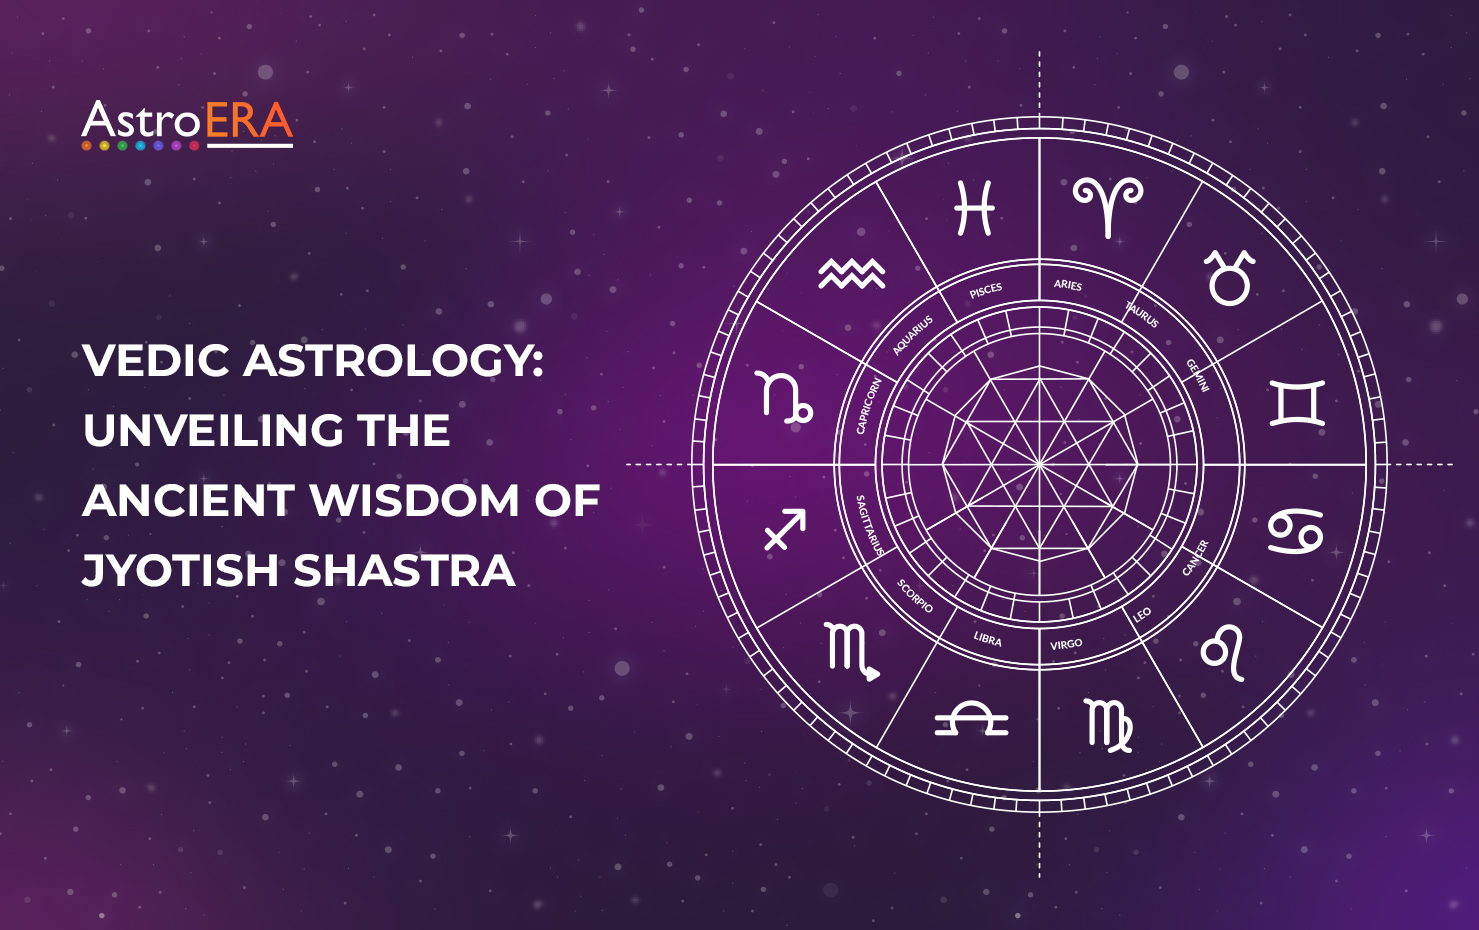 Vedic Astrology: Unveiling the Ancient Wisdom of Jyotish Shastra